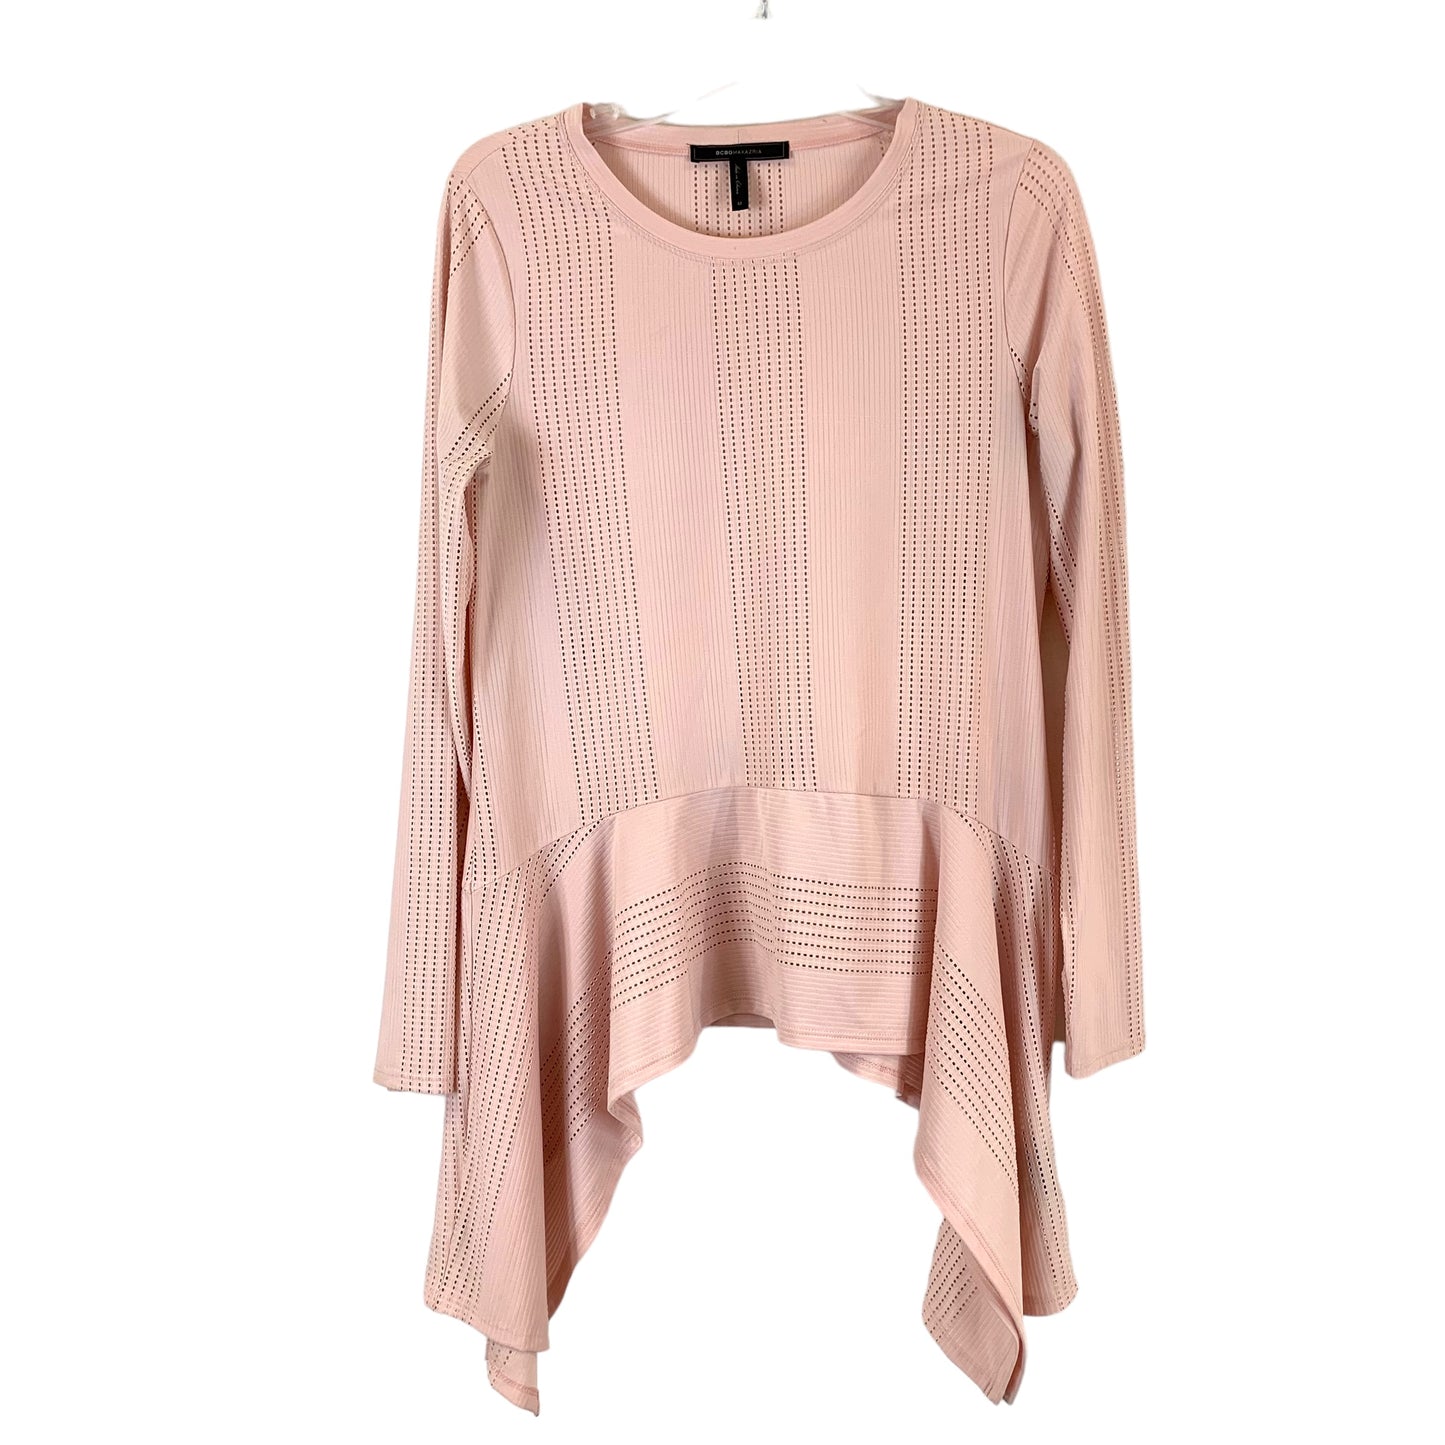 Top Long Sleeve By Bcbgmaxazria  Size: M